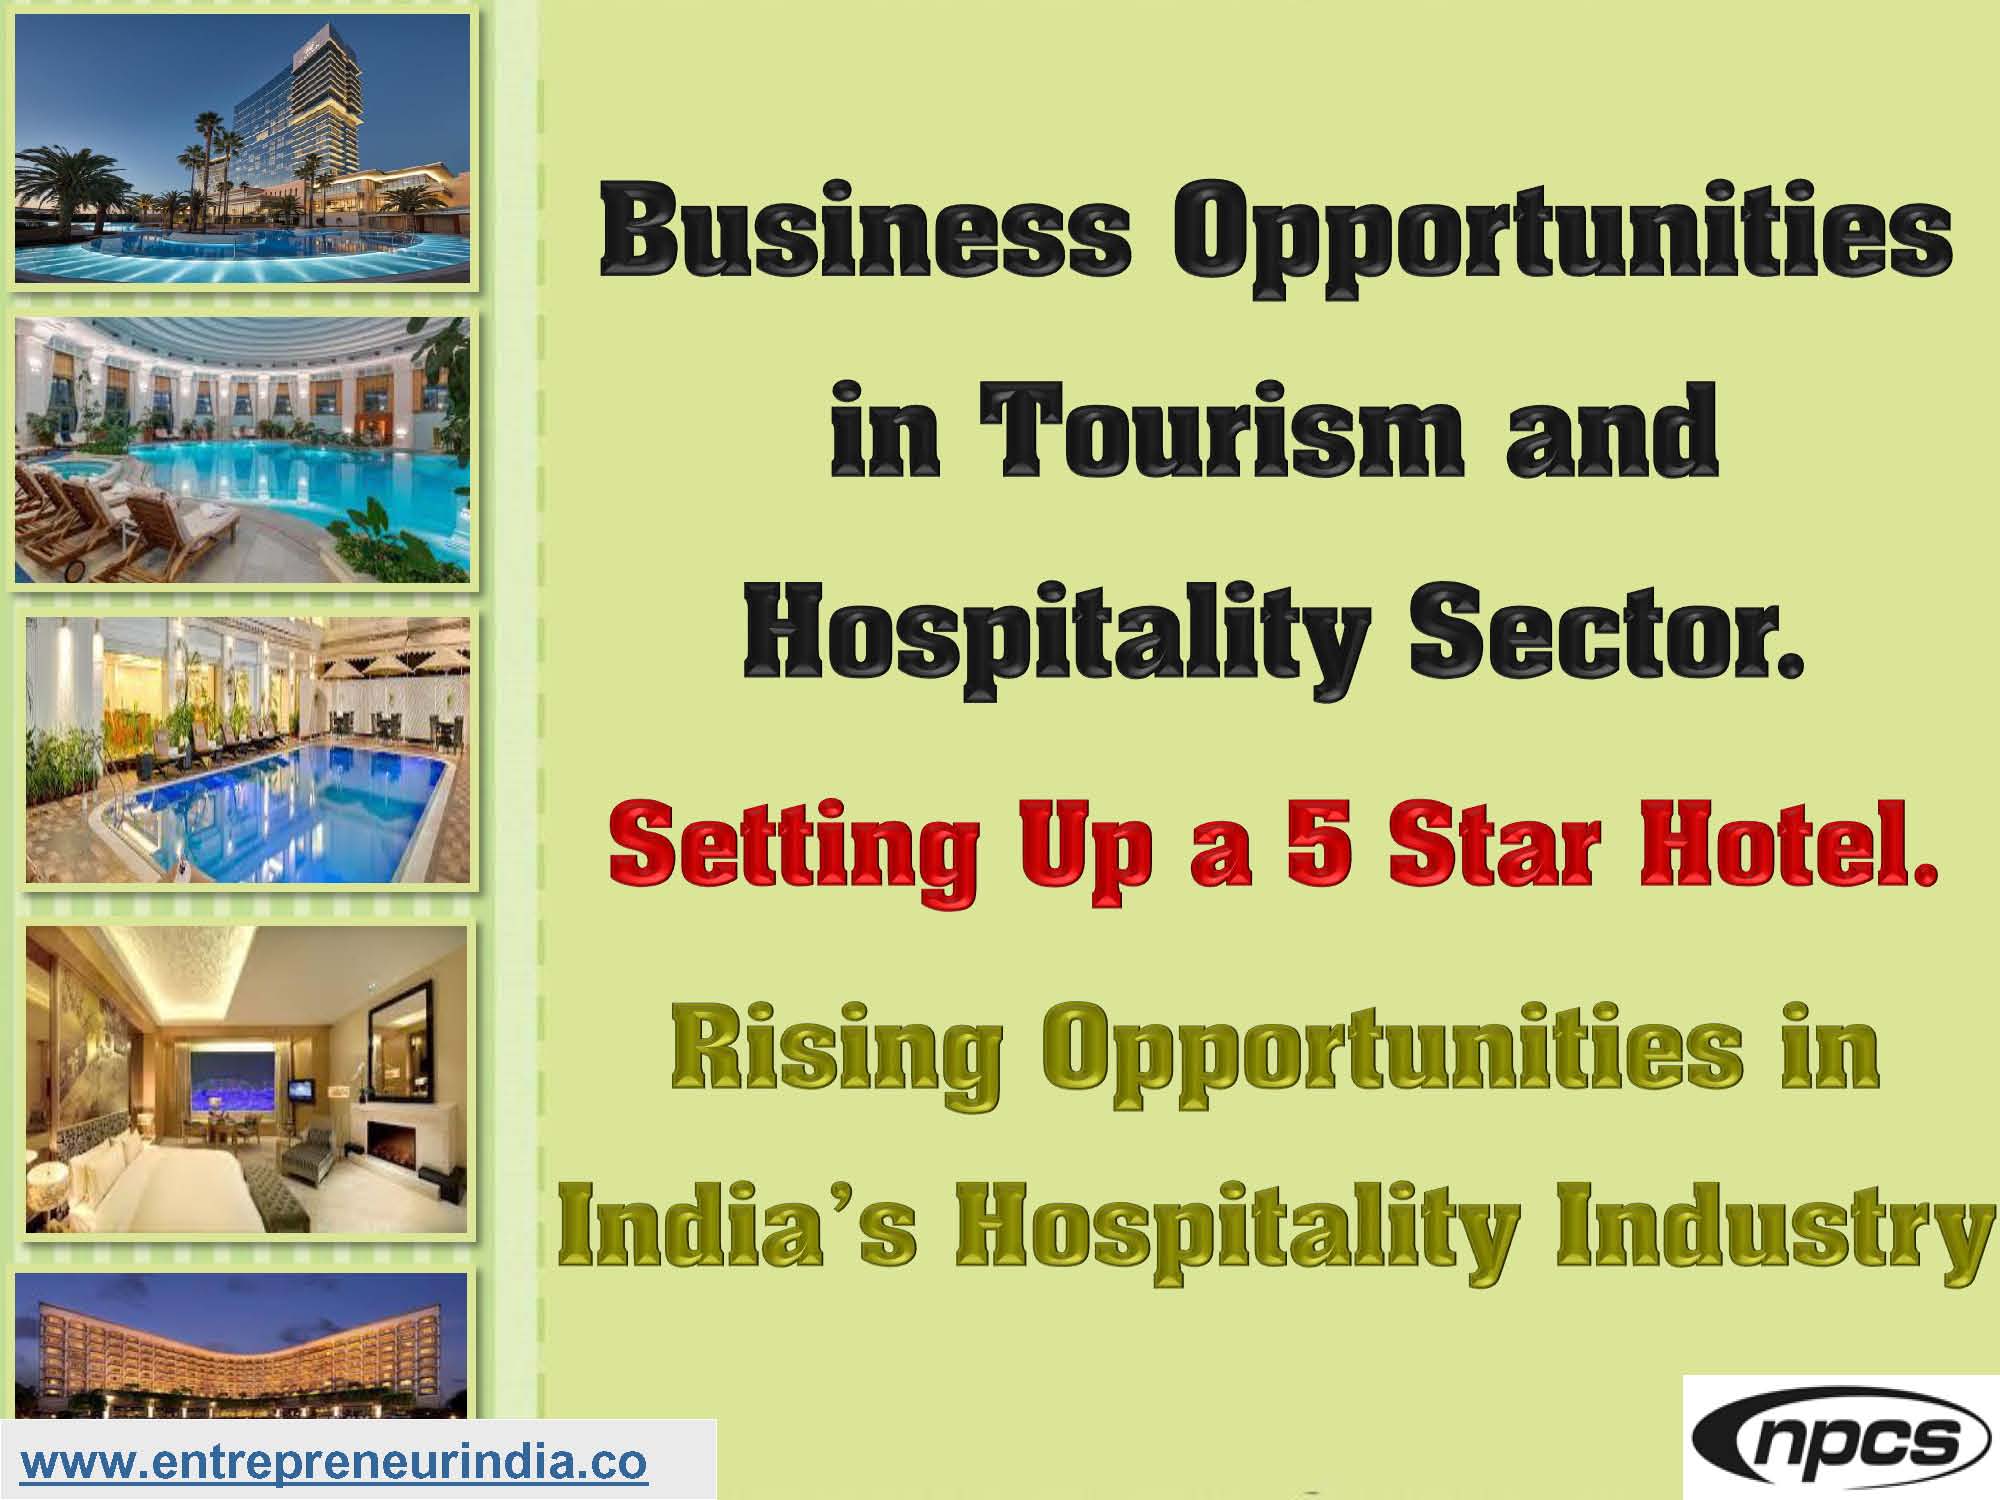 Business Opportunities in Tourism and Hospitality Sector